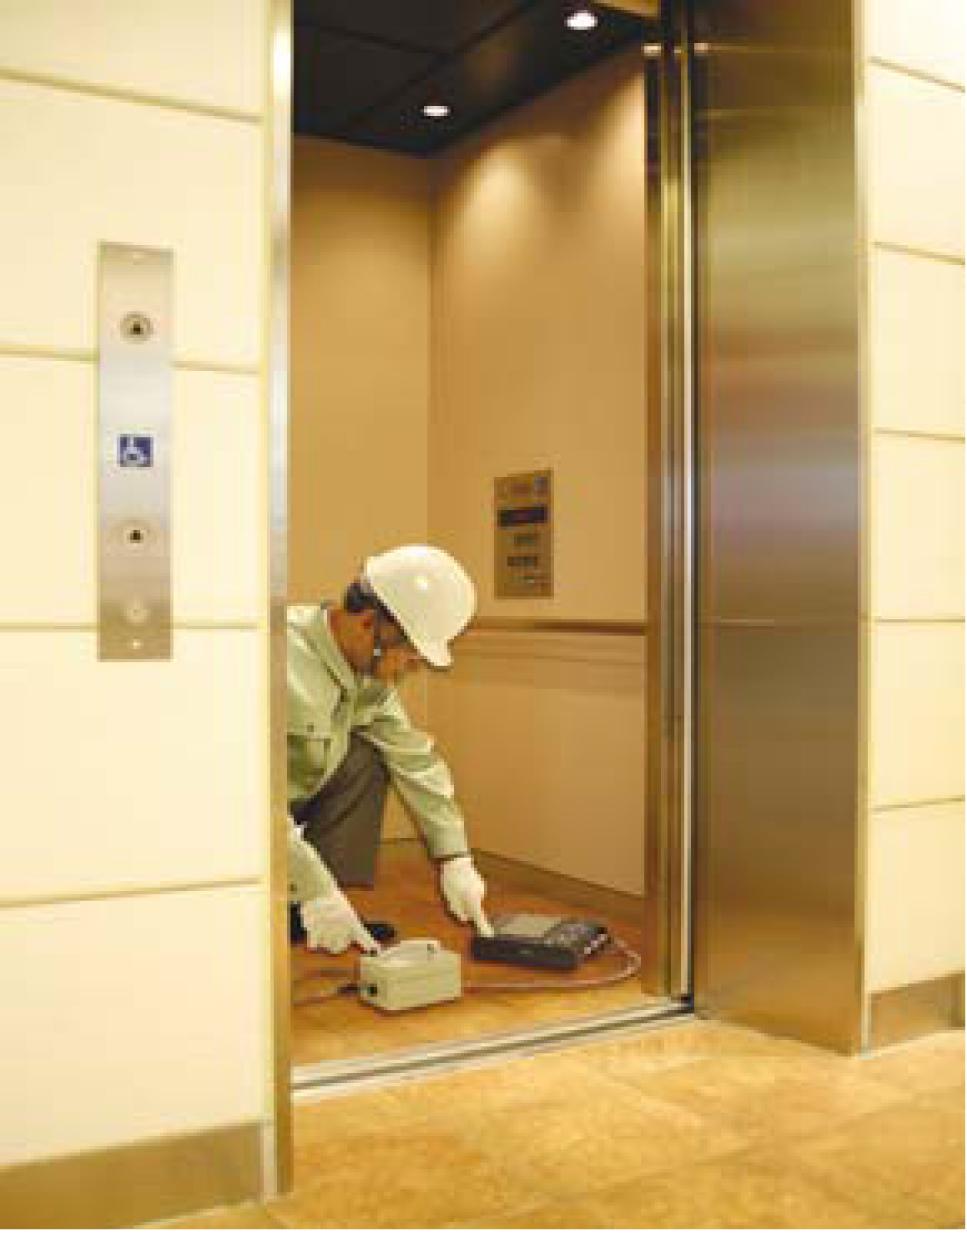 Measure The Vibration Of An Elevator To Analyze Ride Comfort Hioki